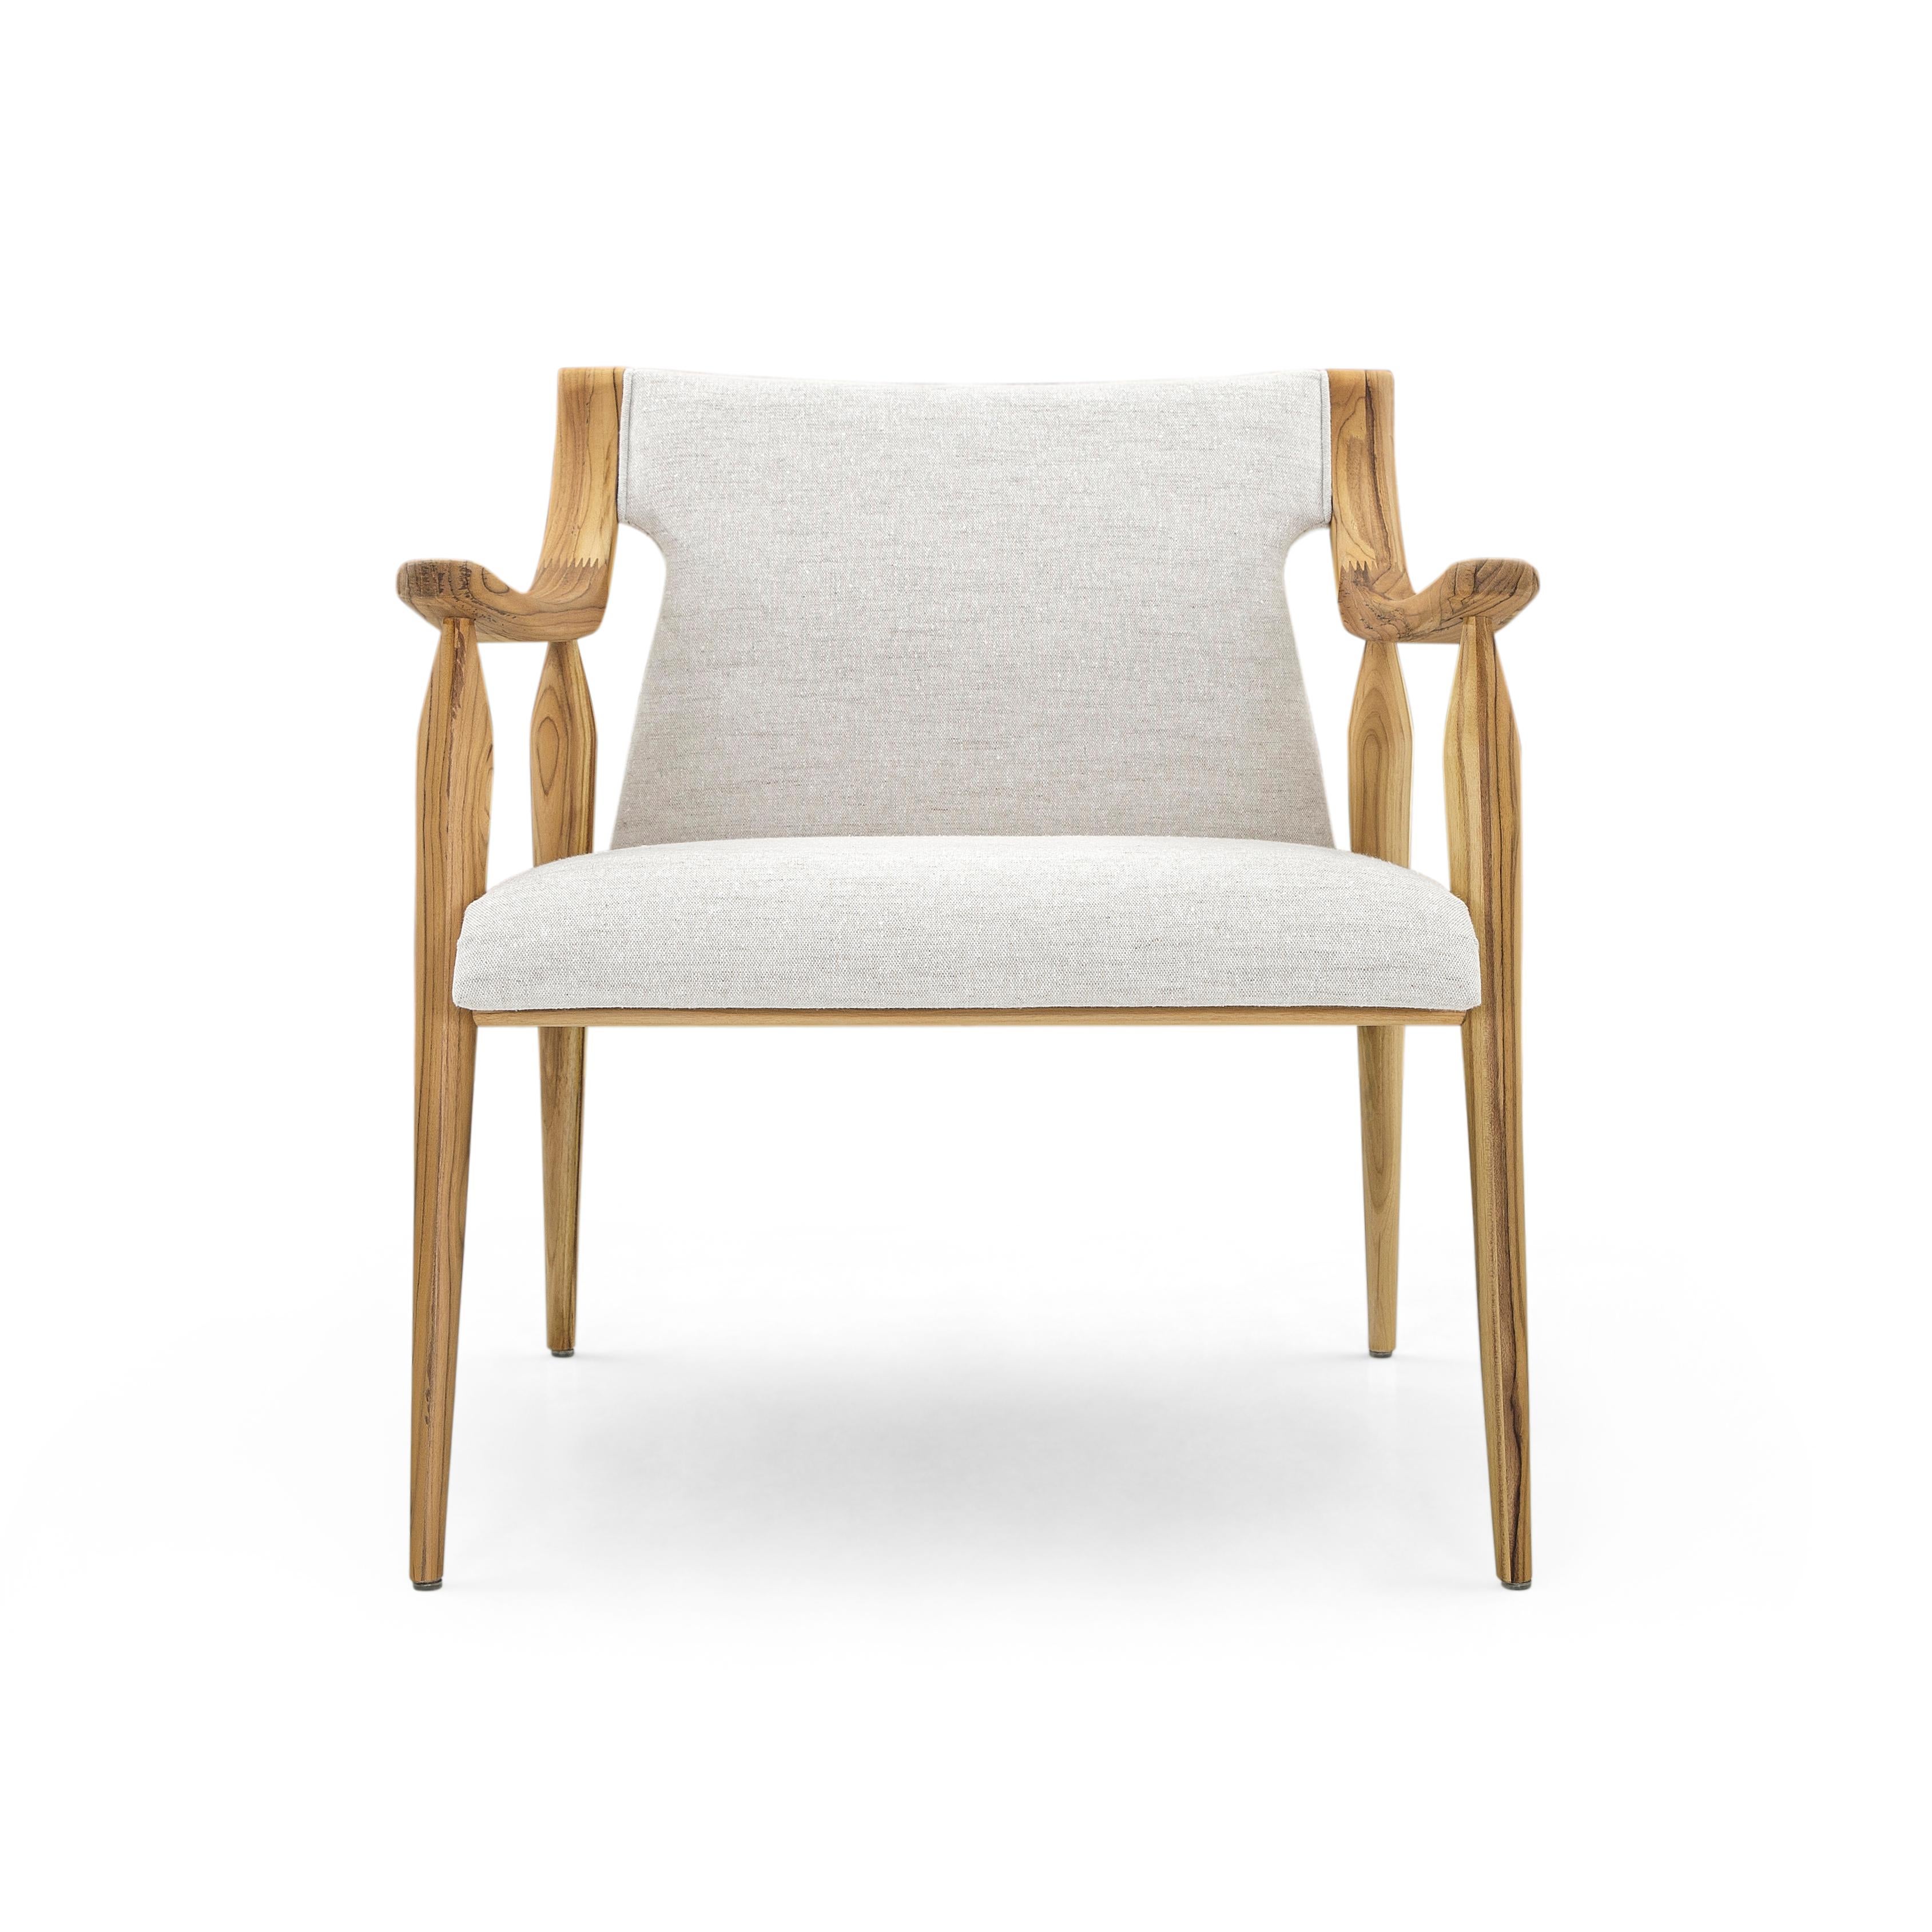 Mince Armchair Featuring Curved Arms and Spindle Legs in Teak Wood Finish In New Condition For Sale In Miami, FL